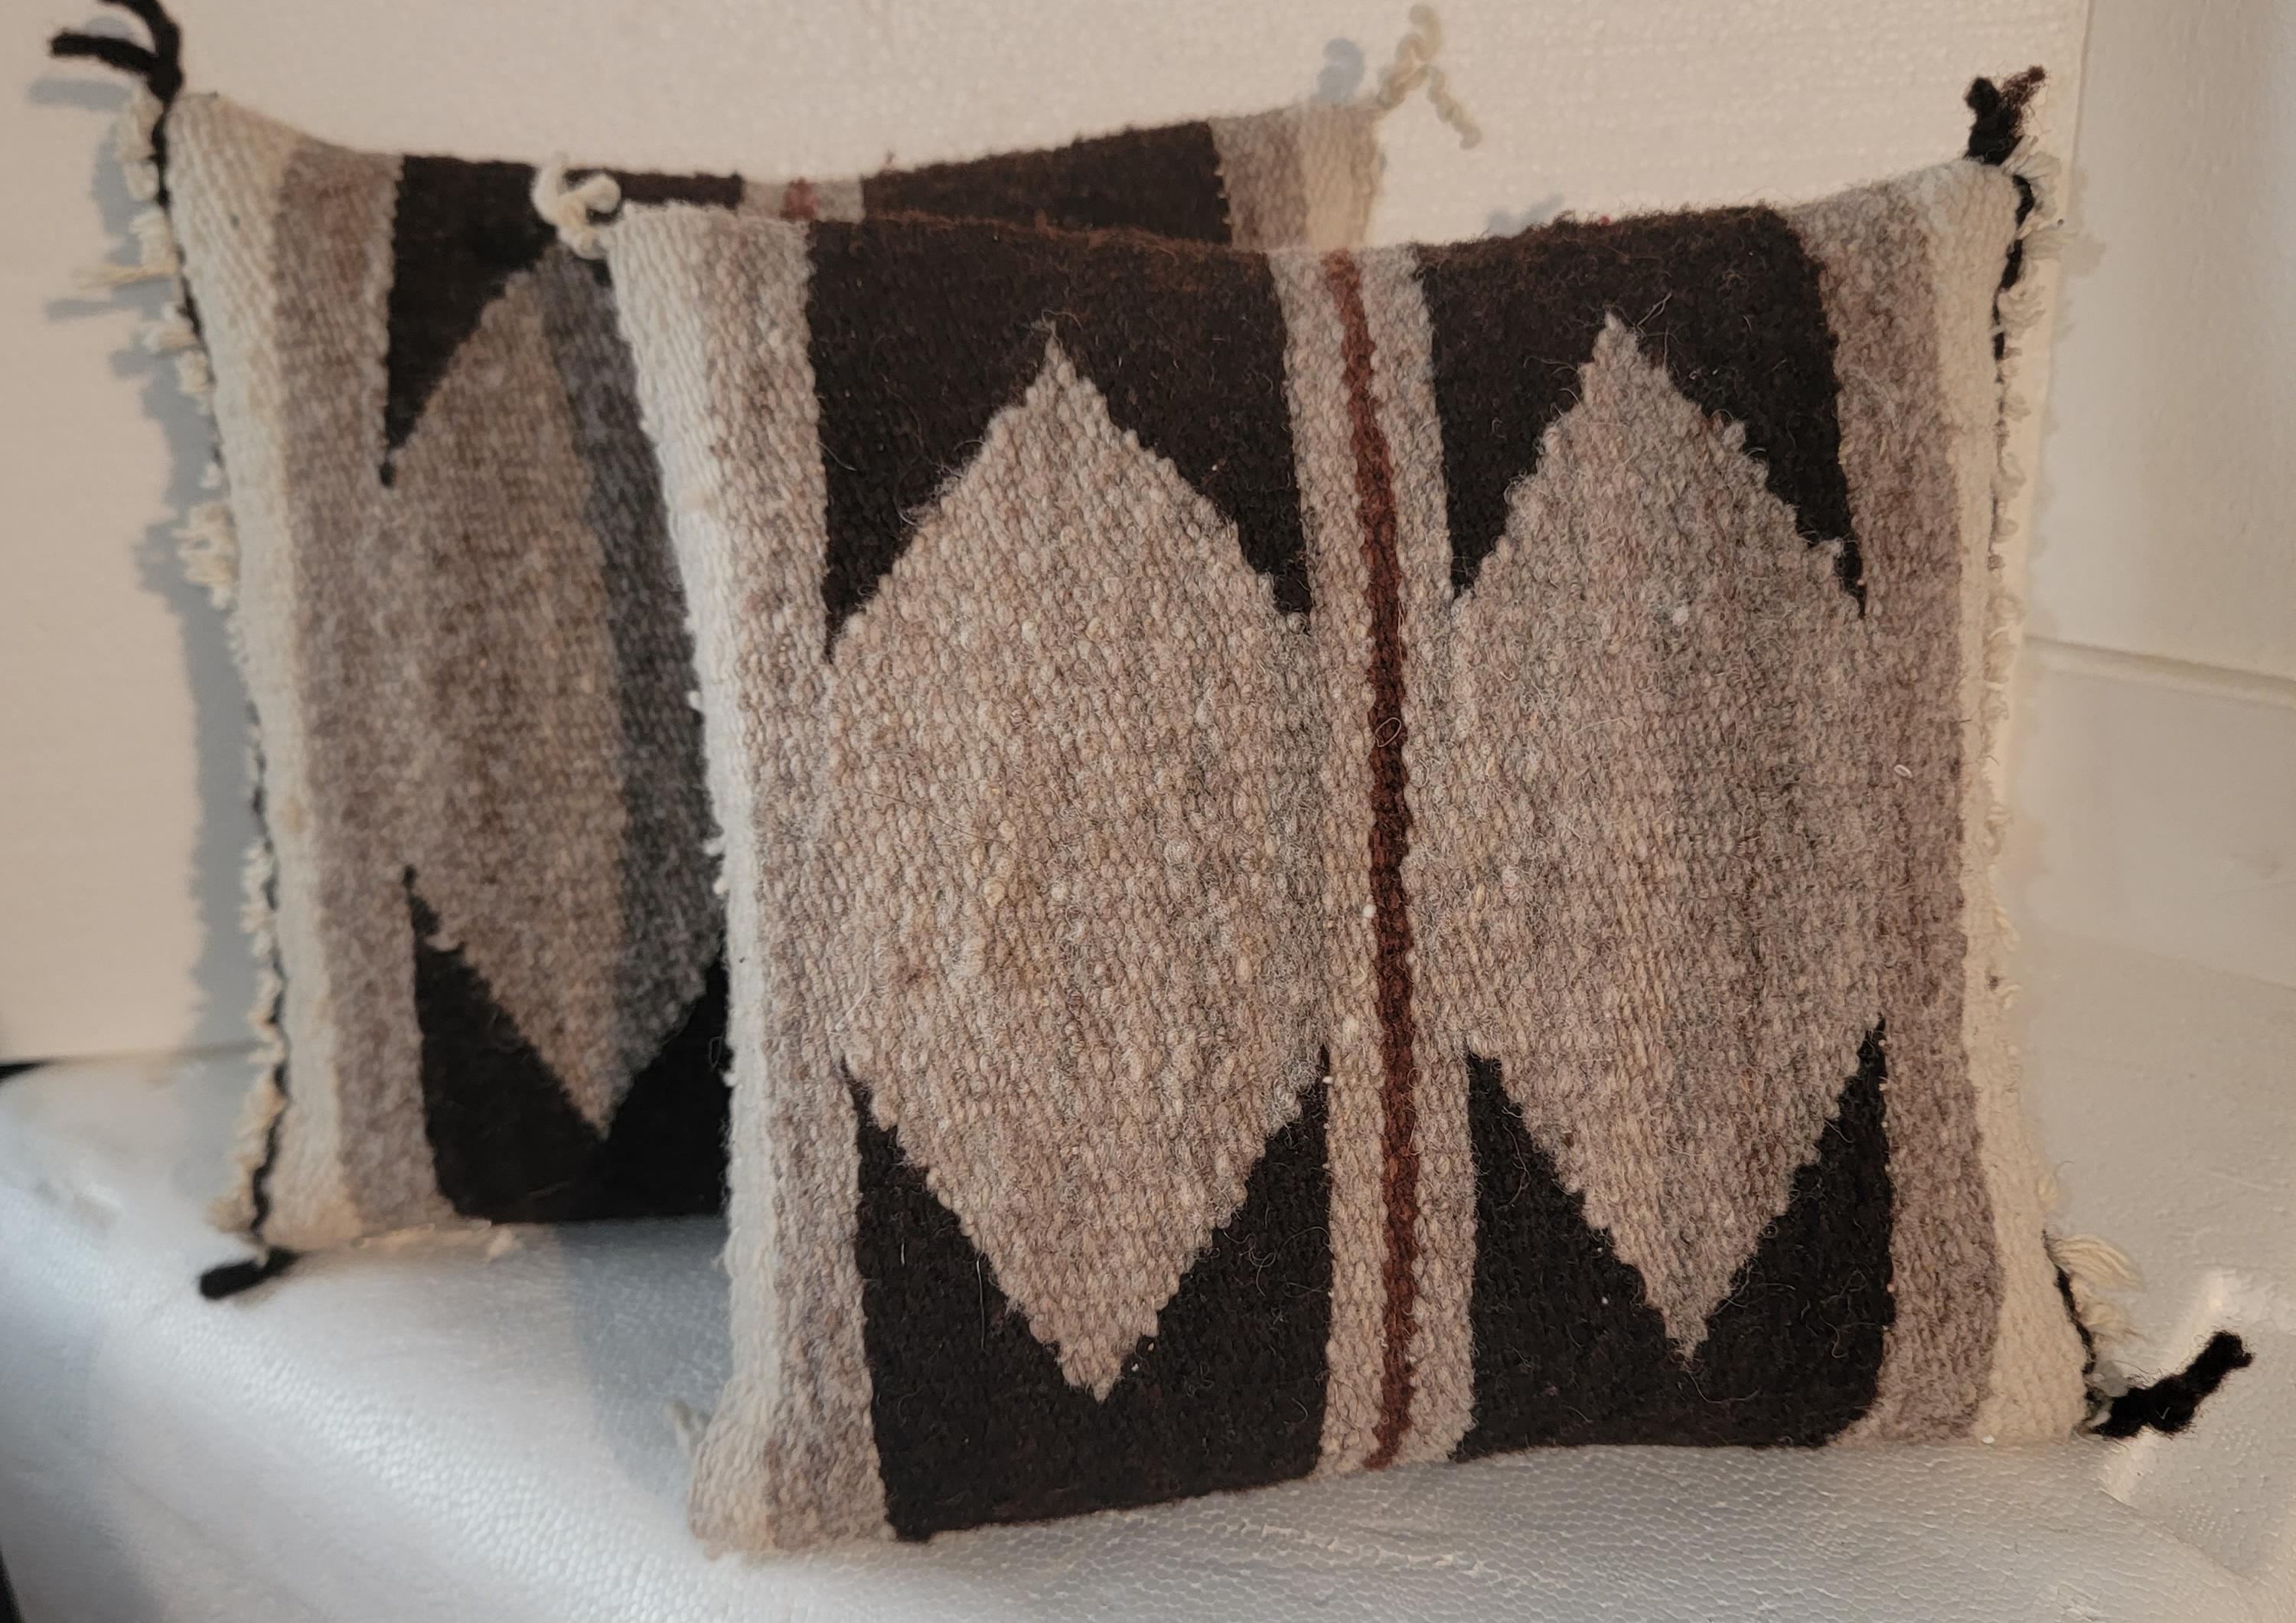 American Collection of Three Mini Navajo Indian Weaving Pillows For Sale